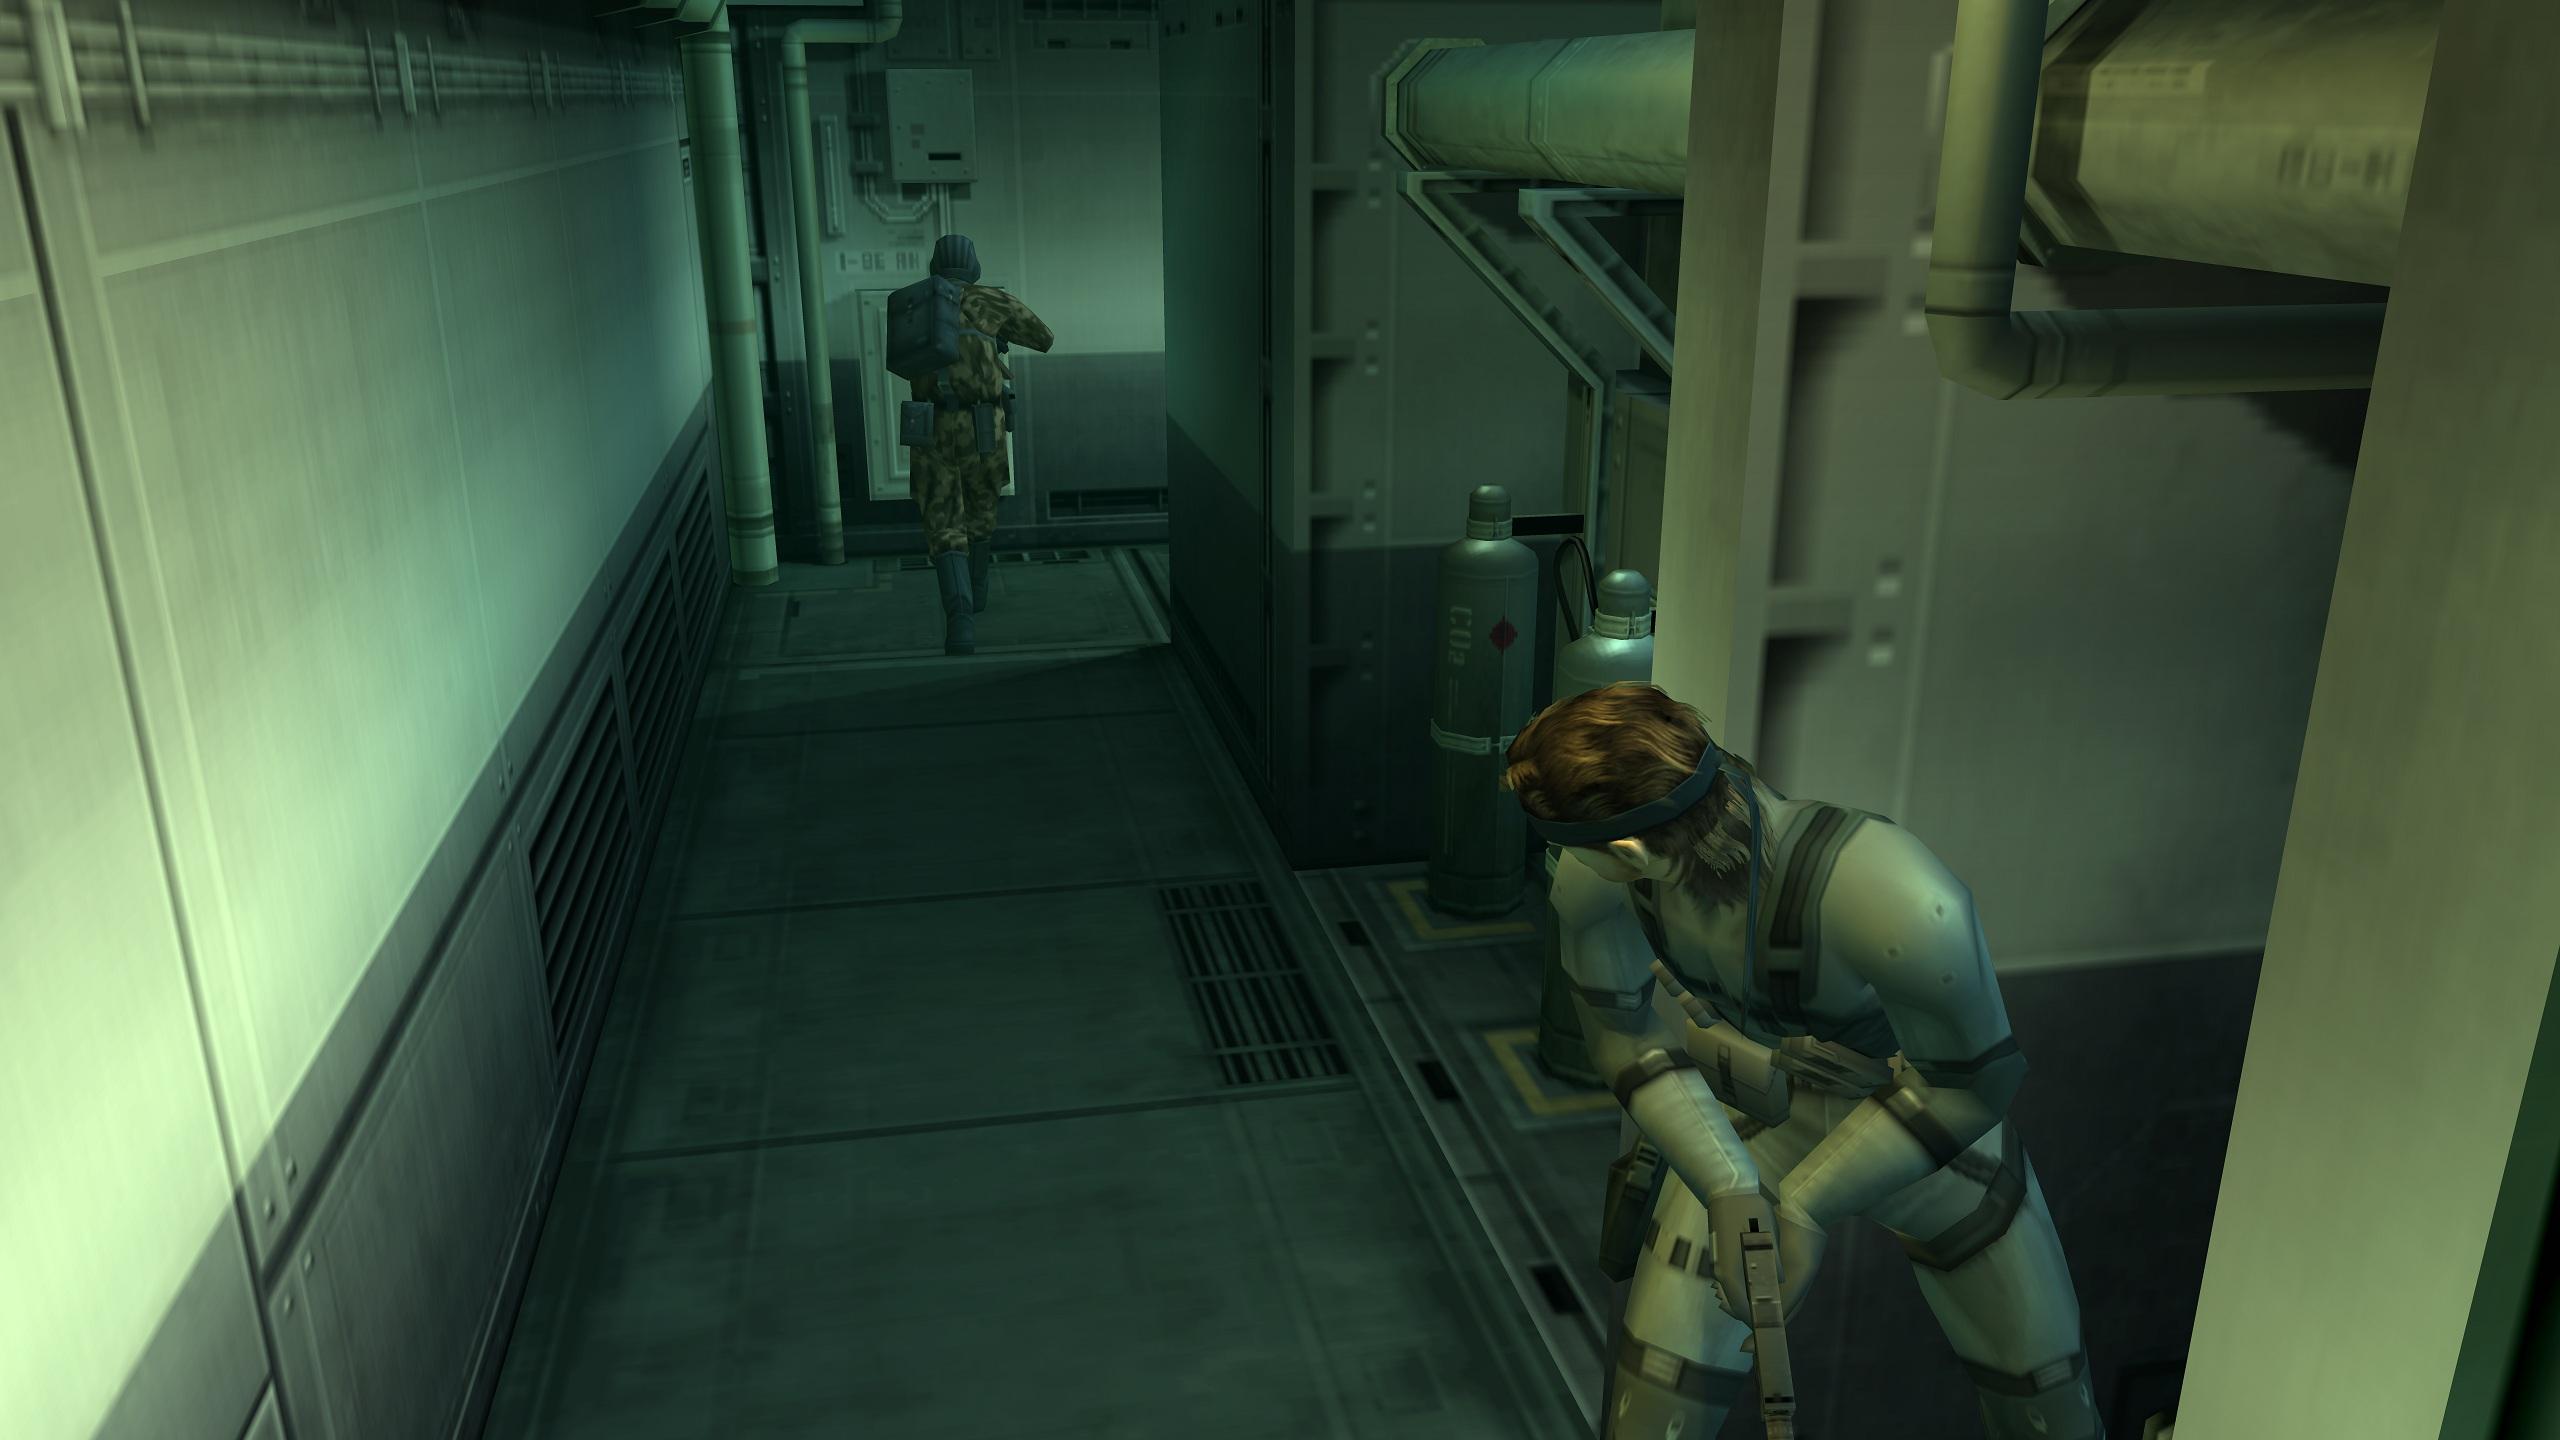 Games I've played: Metal Gear Solid 2: Sons of Liberty, Animal